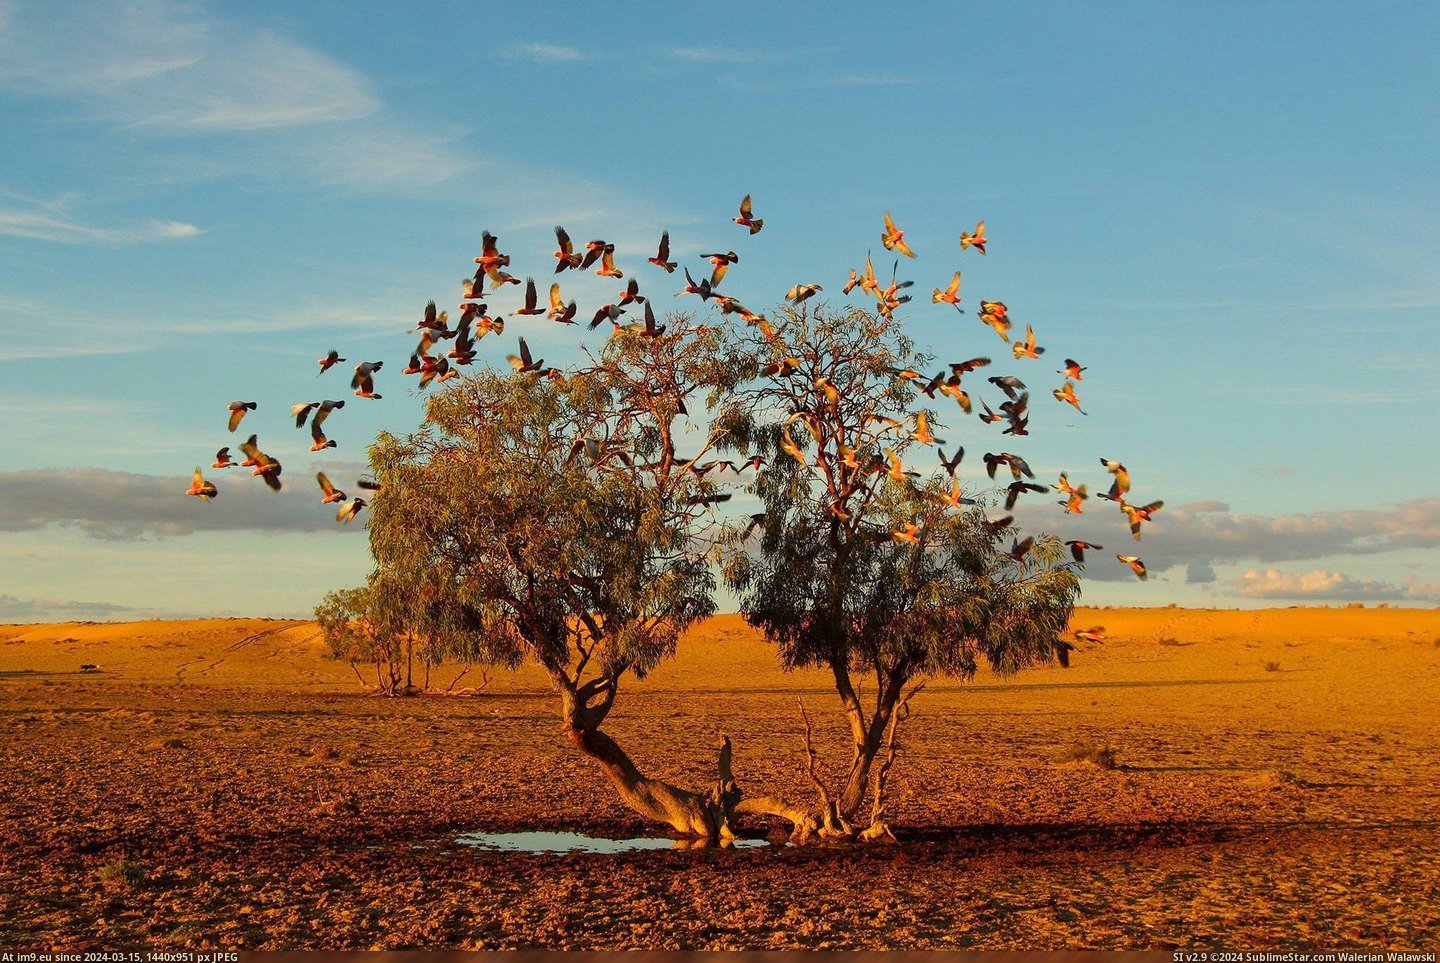 #Photo #Tree #Australia #Spencer #Dreaming #Desert #2048x1365 #Christian [Earthporn] 'The Dreaming Tree' - Strzelecki Desert, Australia [2048x1365] Photo by Christian Spencer Pic. (Image of album My r/EARTHPORN favs))